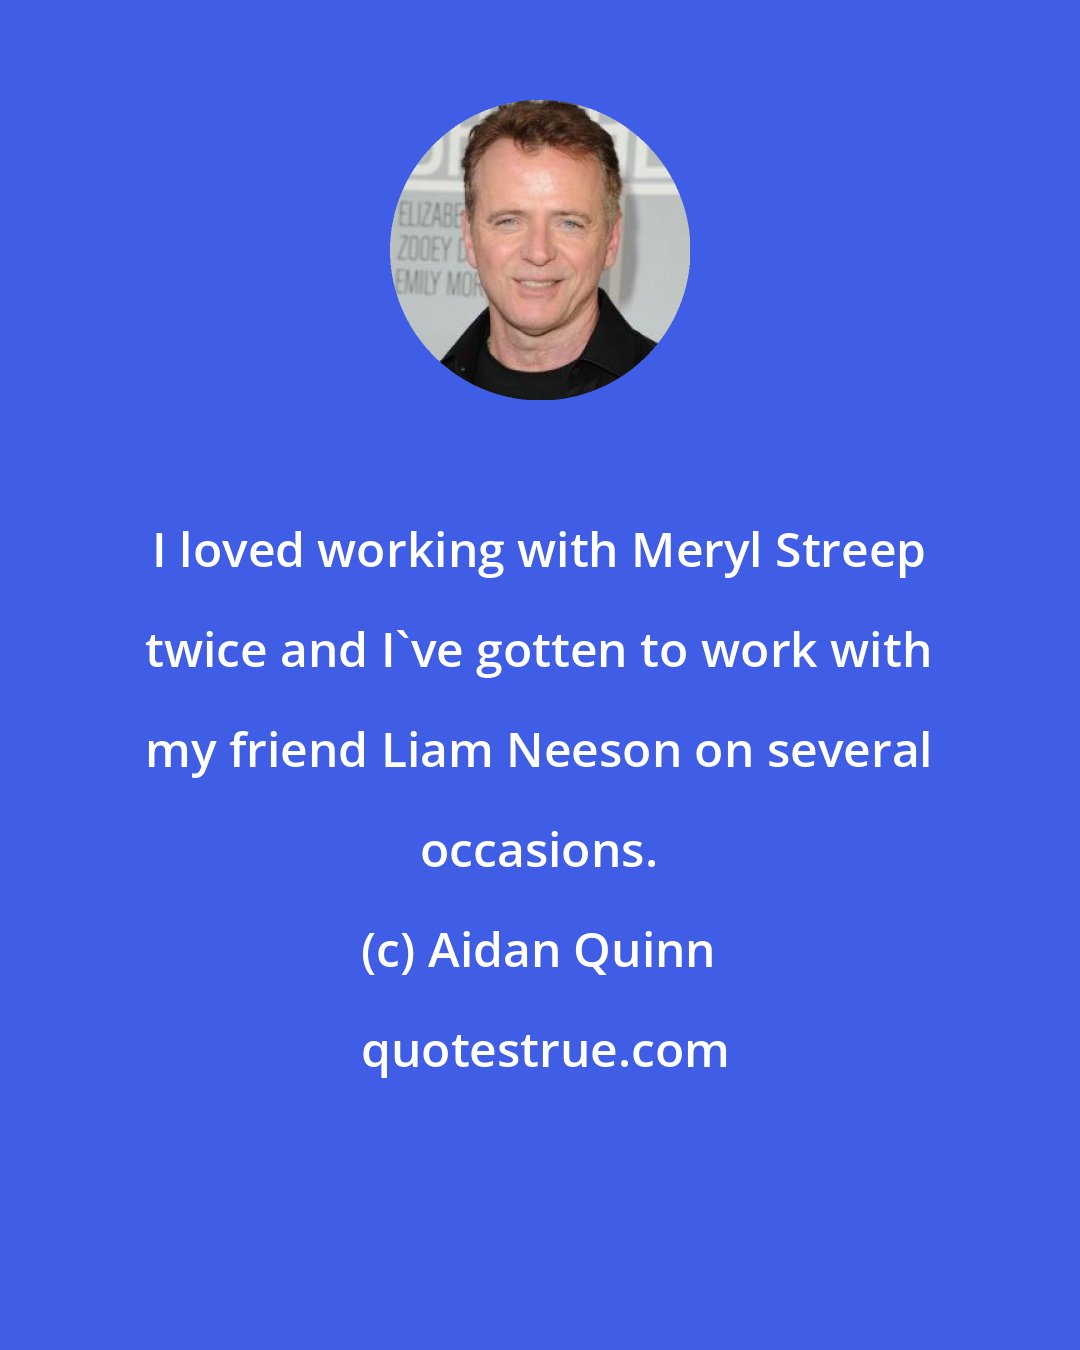 Aidan Quinn: I loved working with Meryl Streep twice and I've gotten to work with my friend Liam Neeson on several occasions.